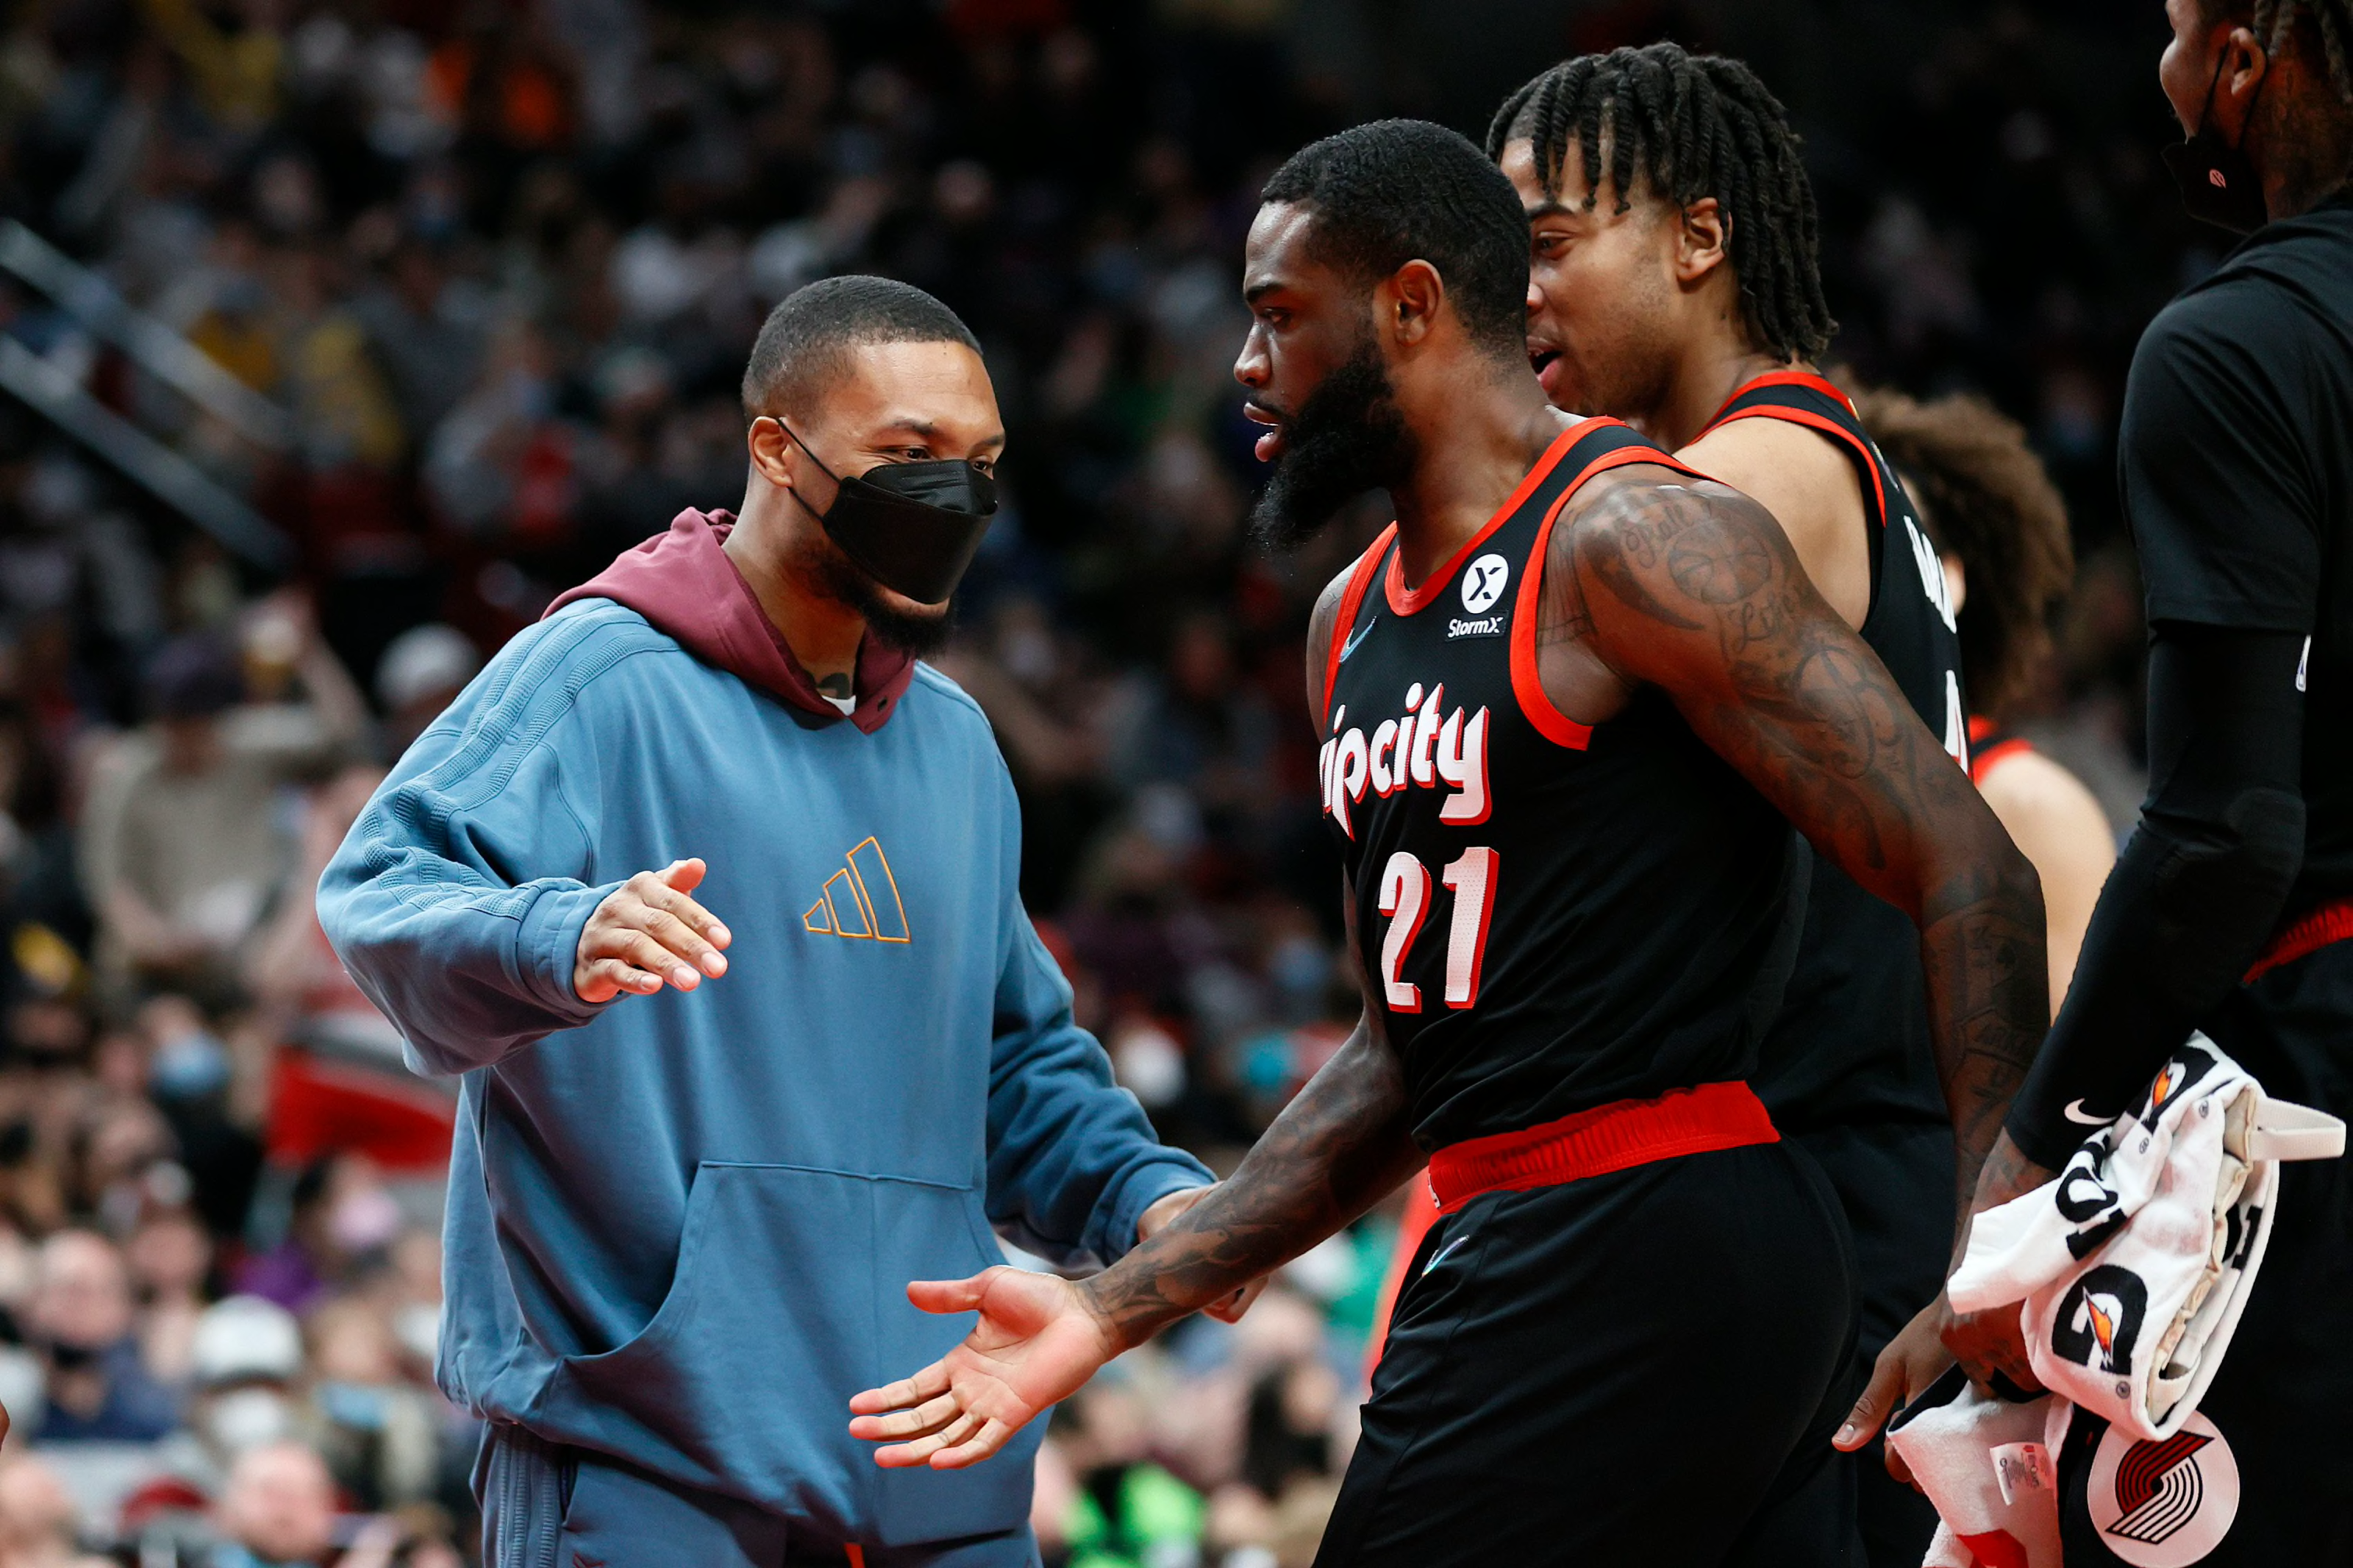 The Portland Trail Blazers have the worst future in the NBA